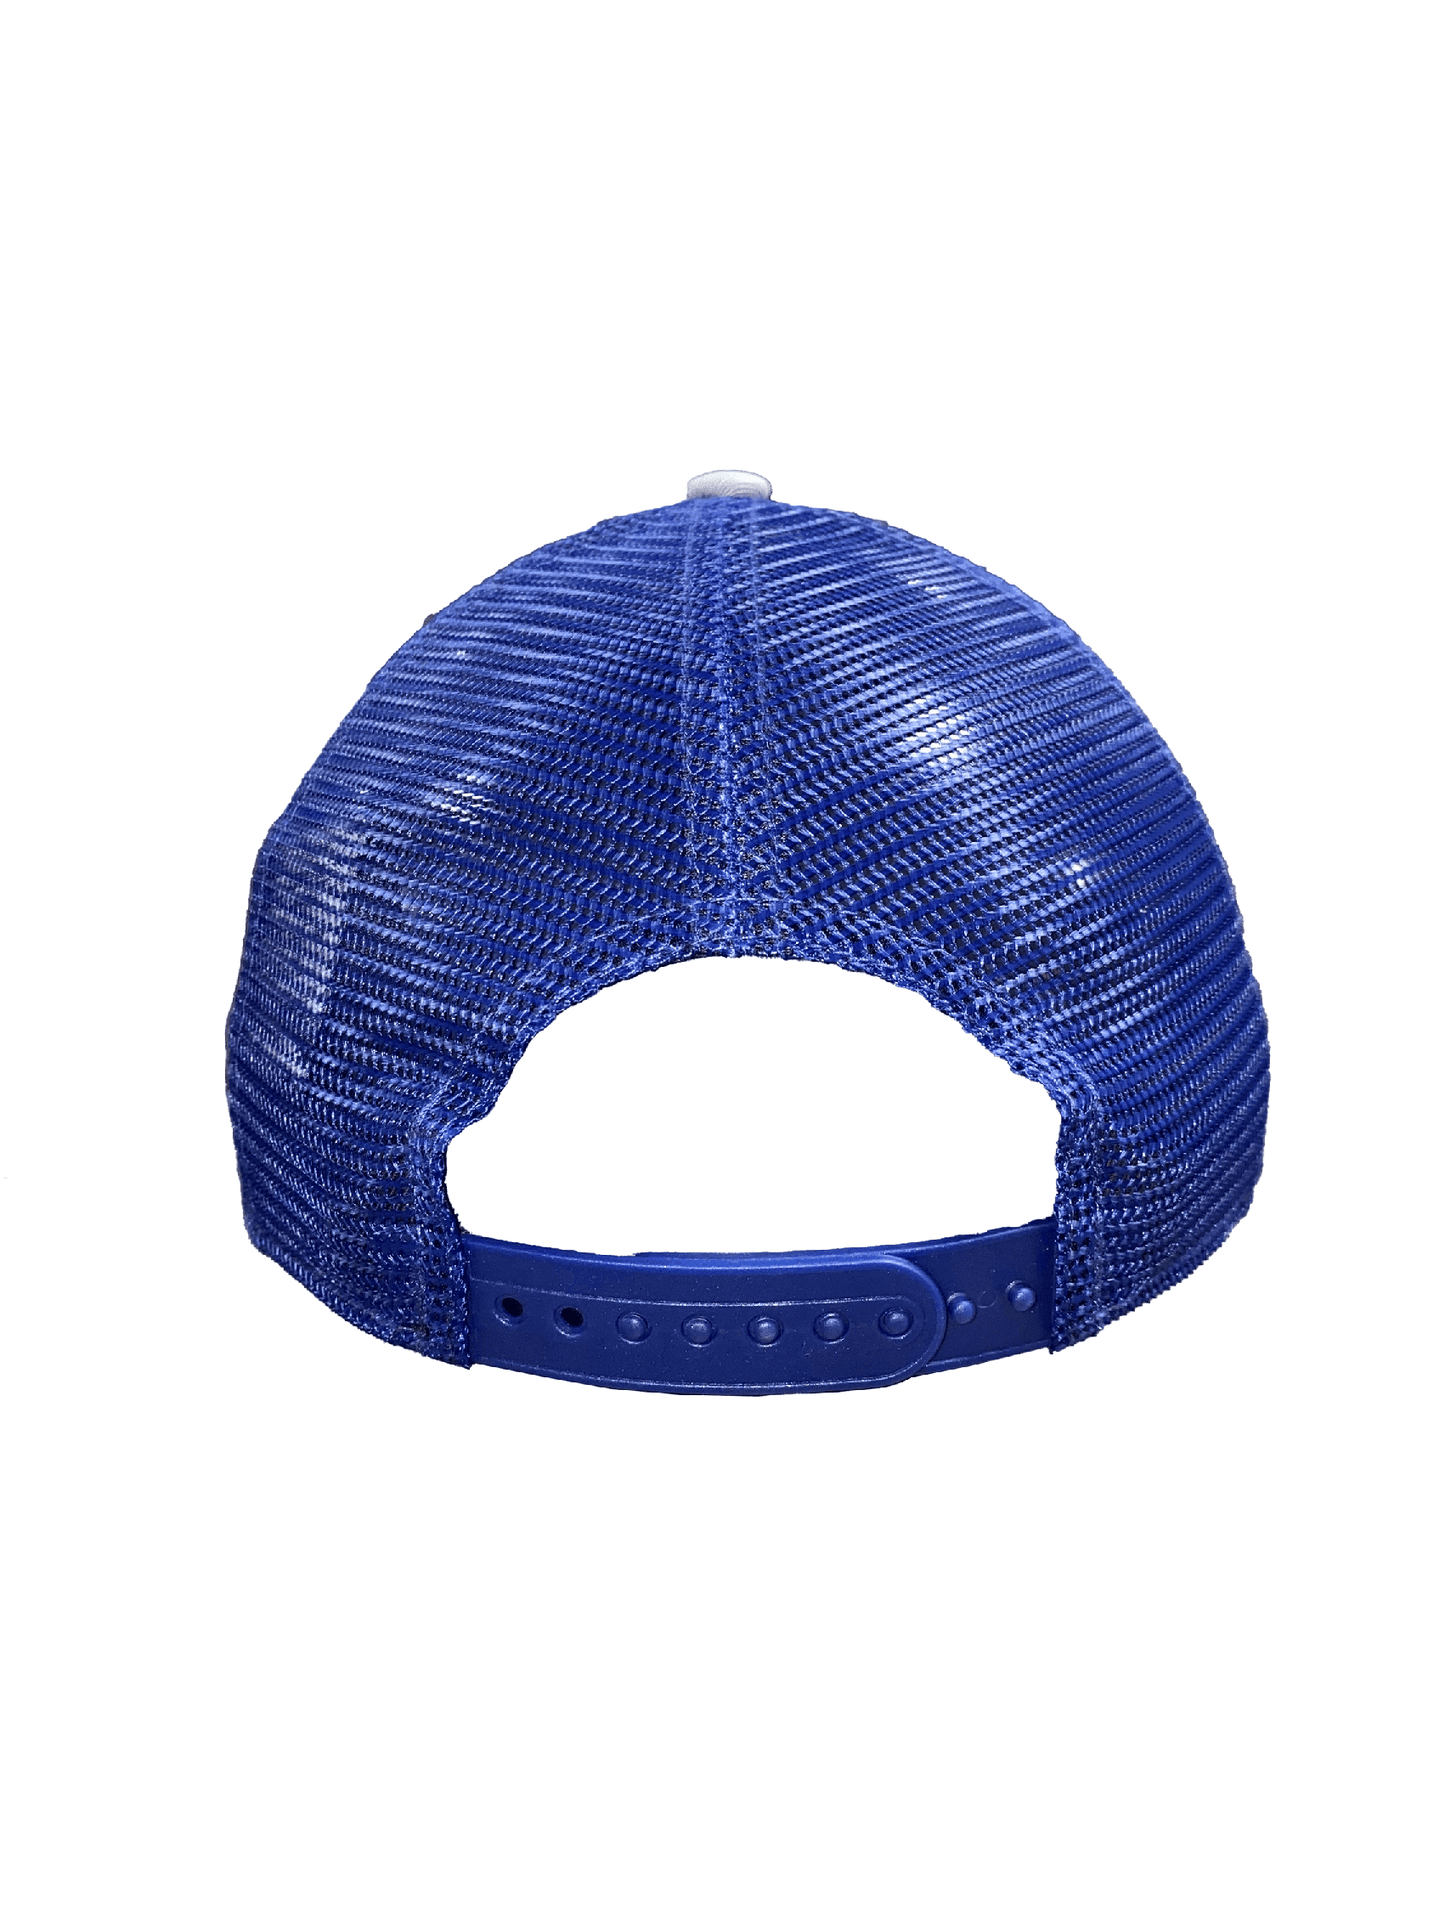 GORRO AJUSTABLE 9FORTY GLITTER PARA MUJER LOS ANGELES DODGERS